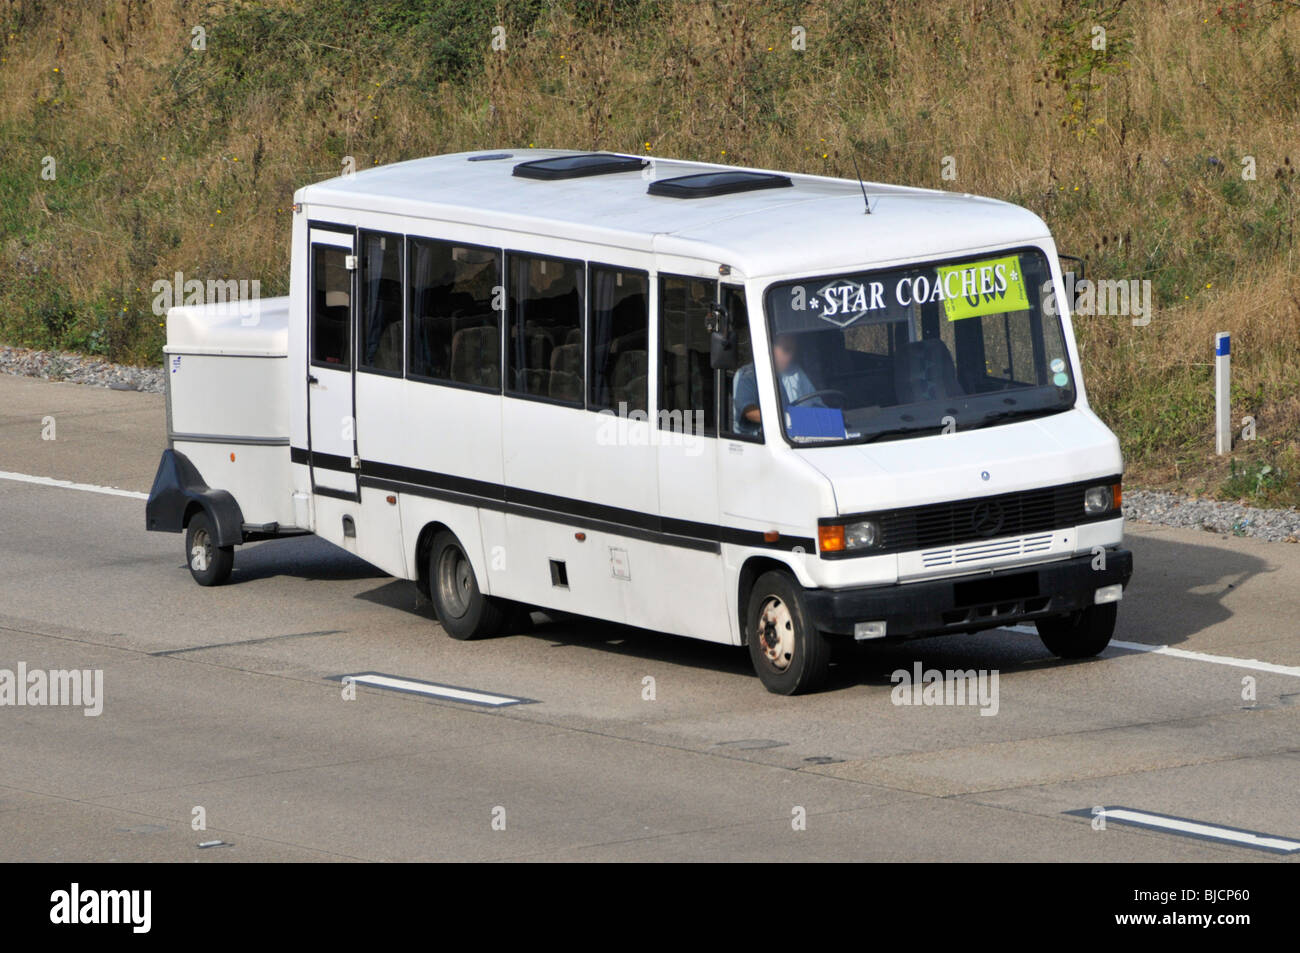 Buses from various cities in the world.: Renault Traffic em mini bus